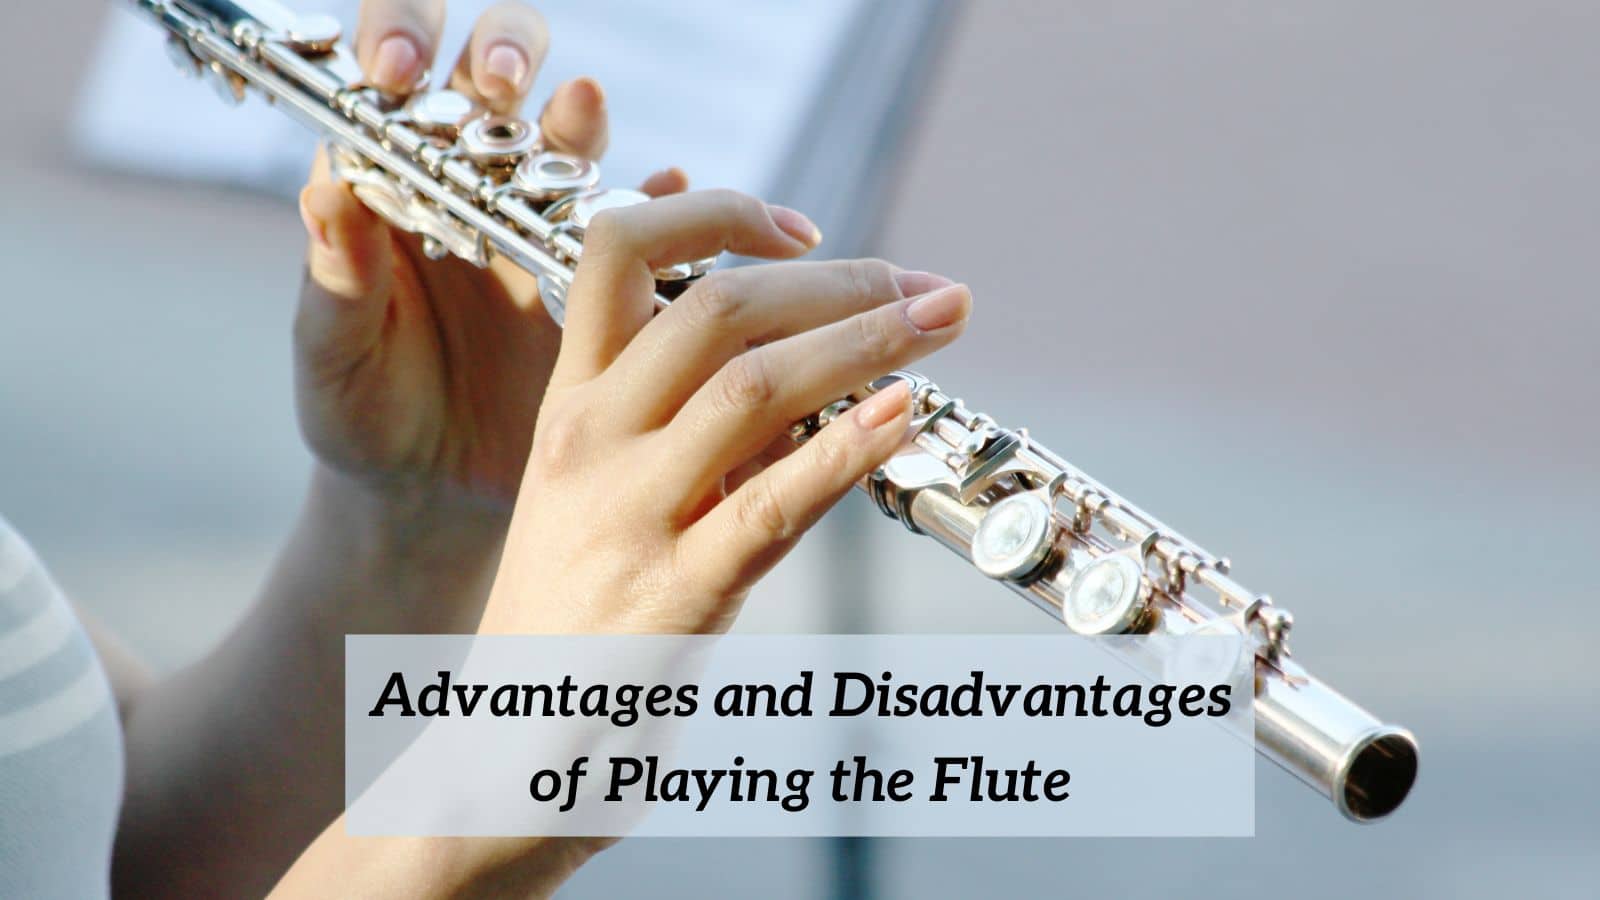 Advantages and Disadvantages of Playing the Flute